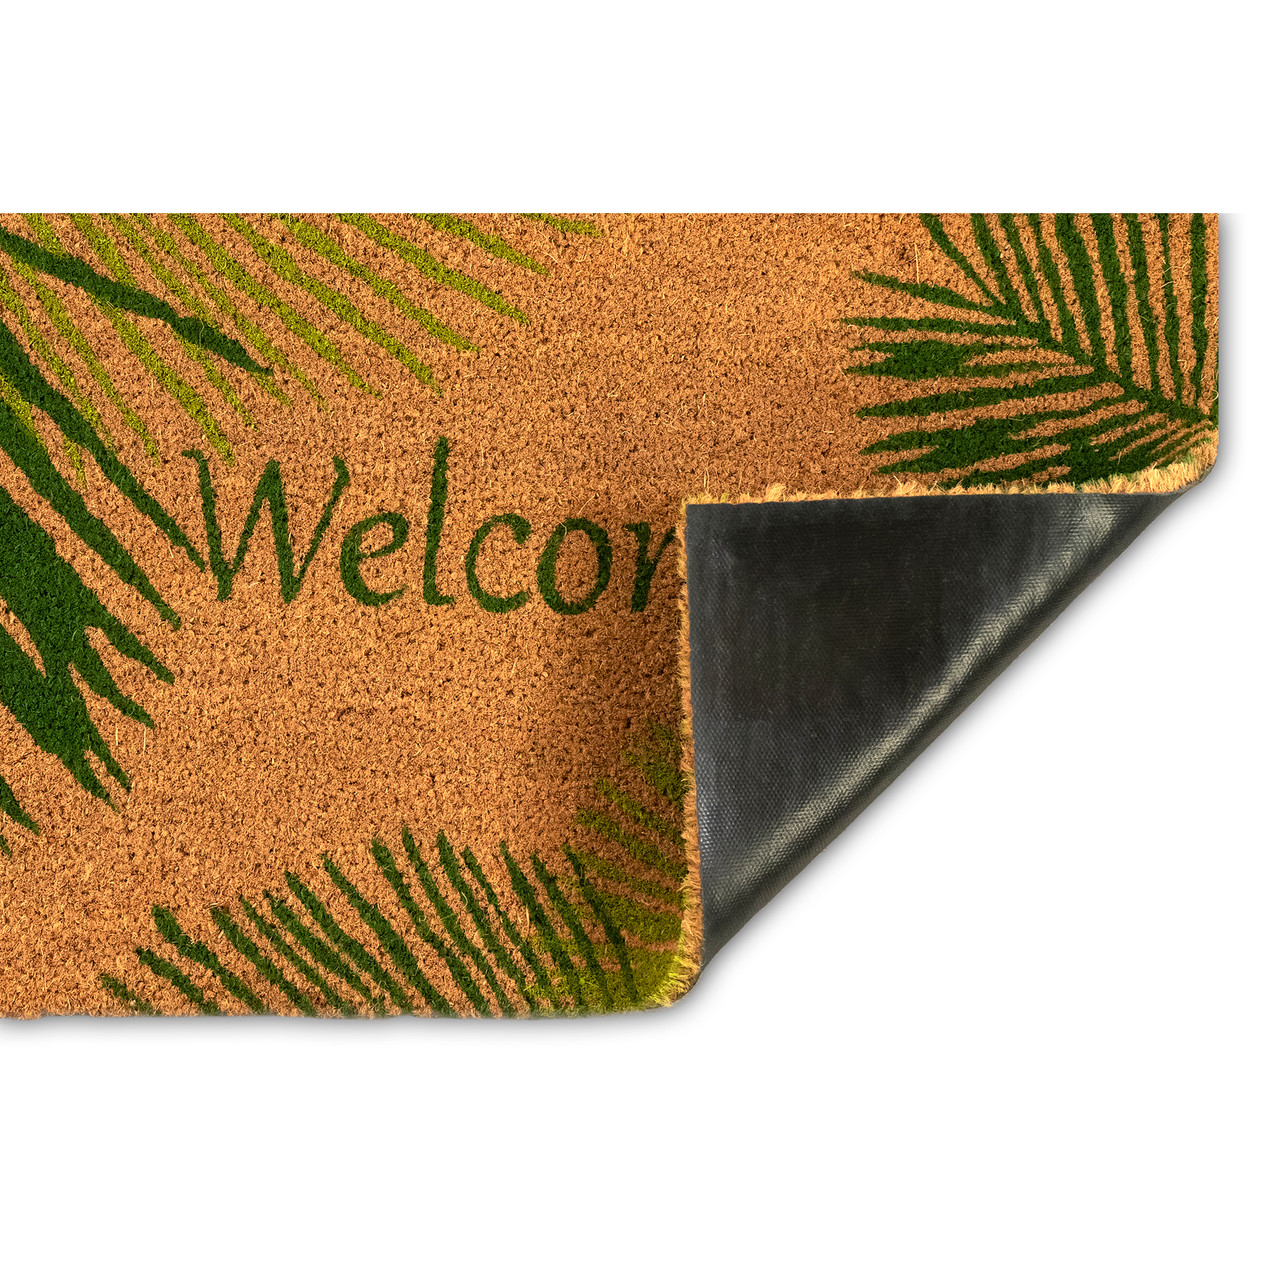 Natura Green Palm "Welcome" All Natural Indoor/Outdoor Rug - 2 Sizes - Backing